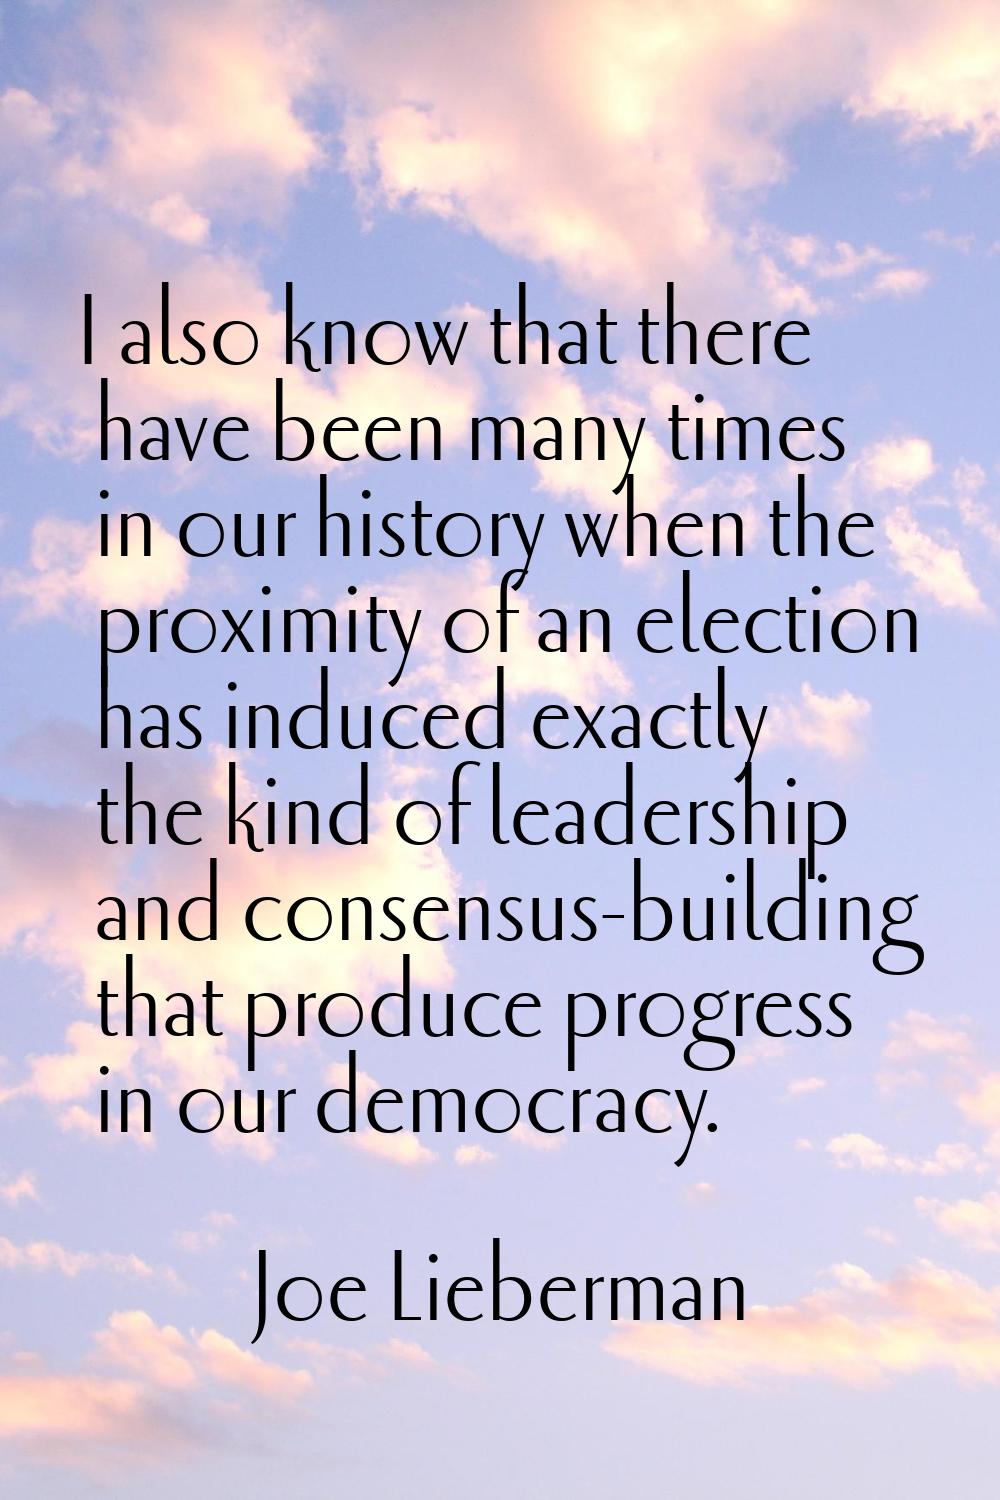 I also know that there have been many times in our history when the proximity of an election has in